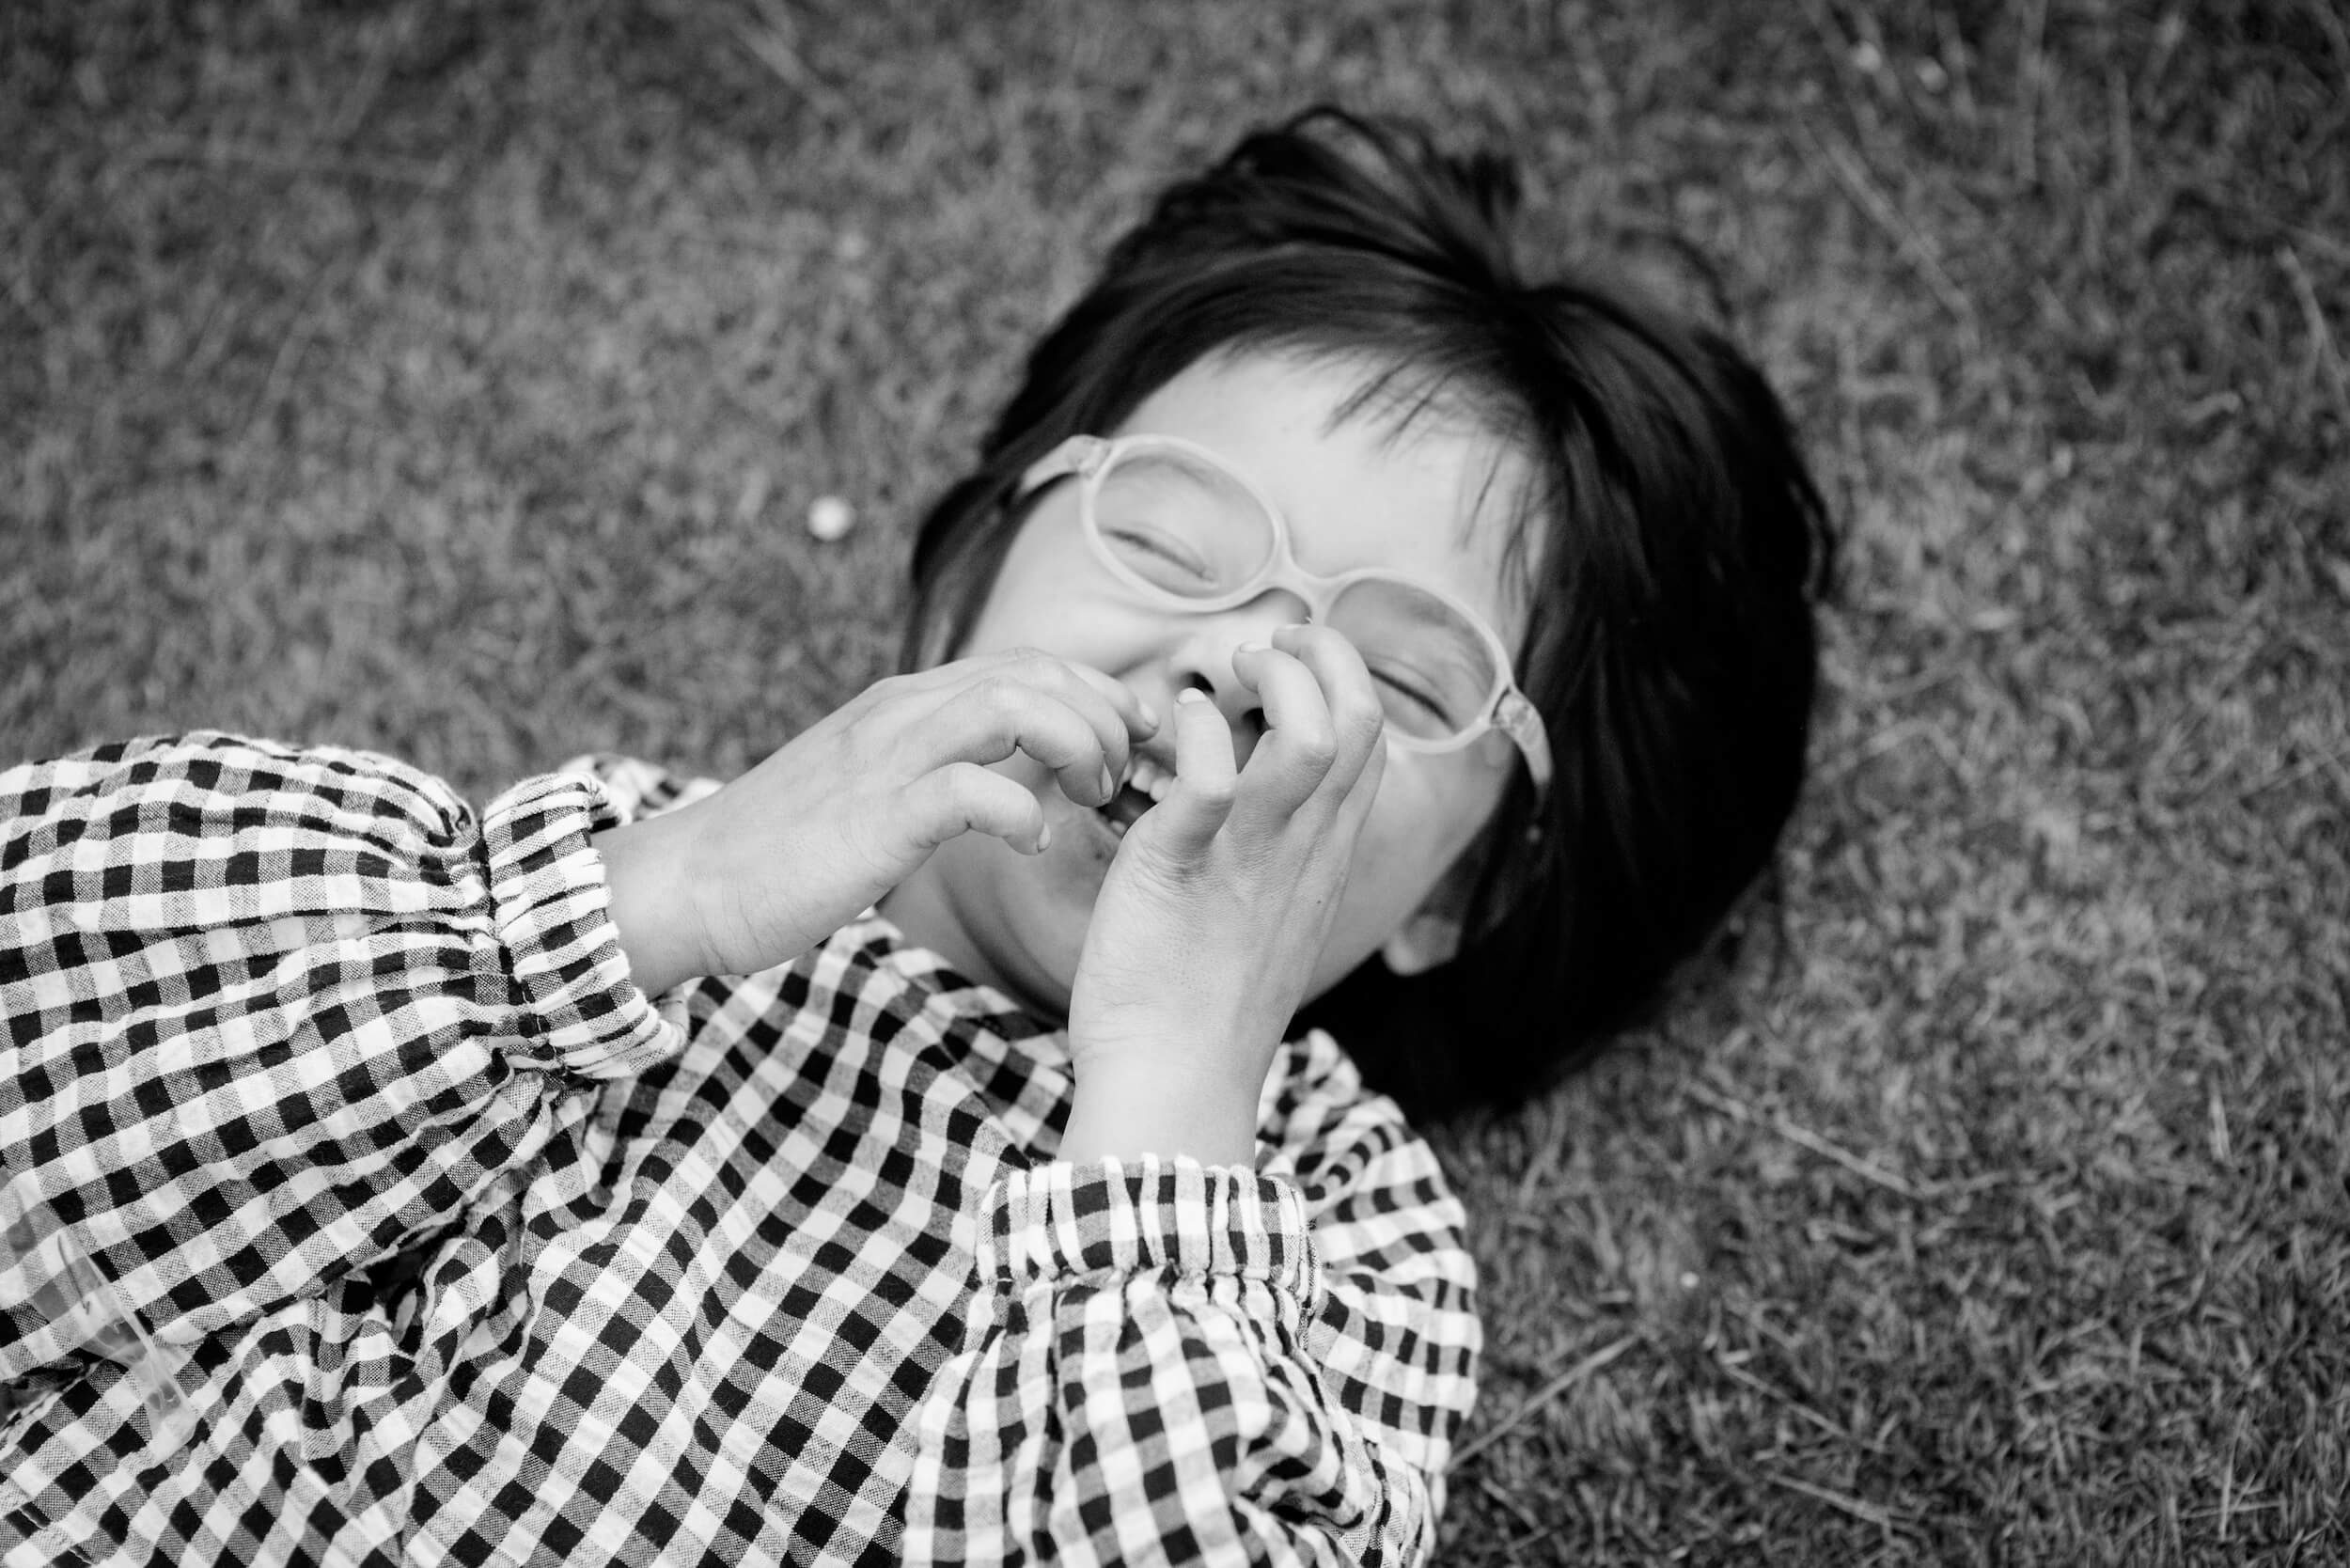 laughing kid children photo session at home black and white photography